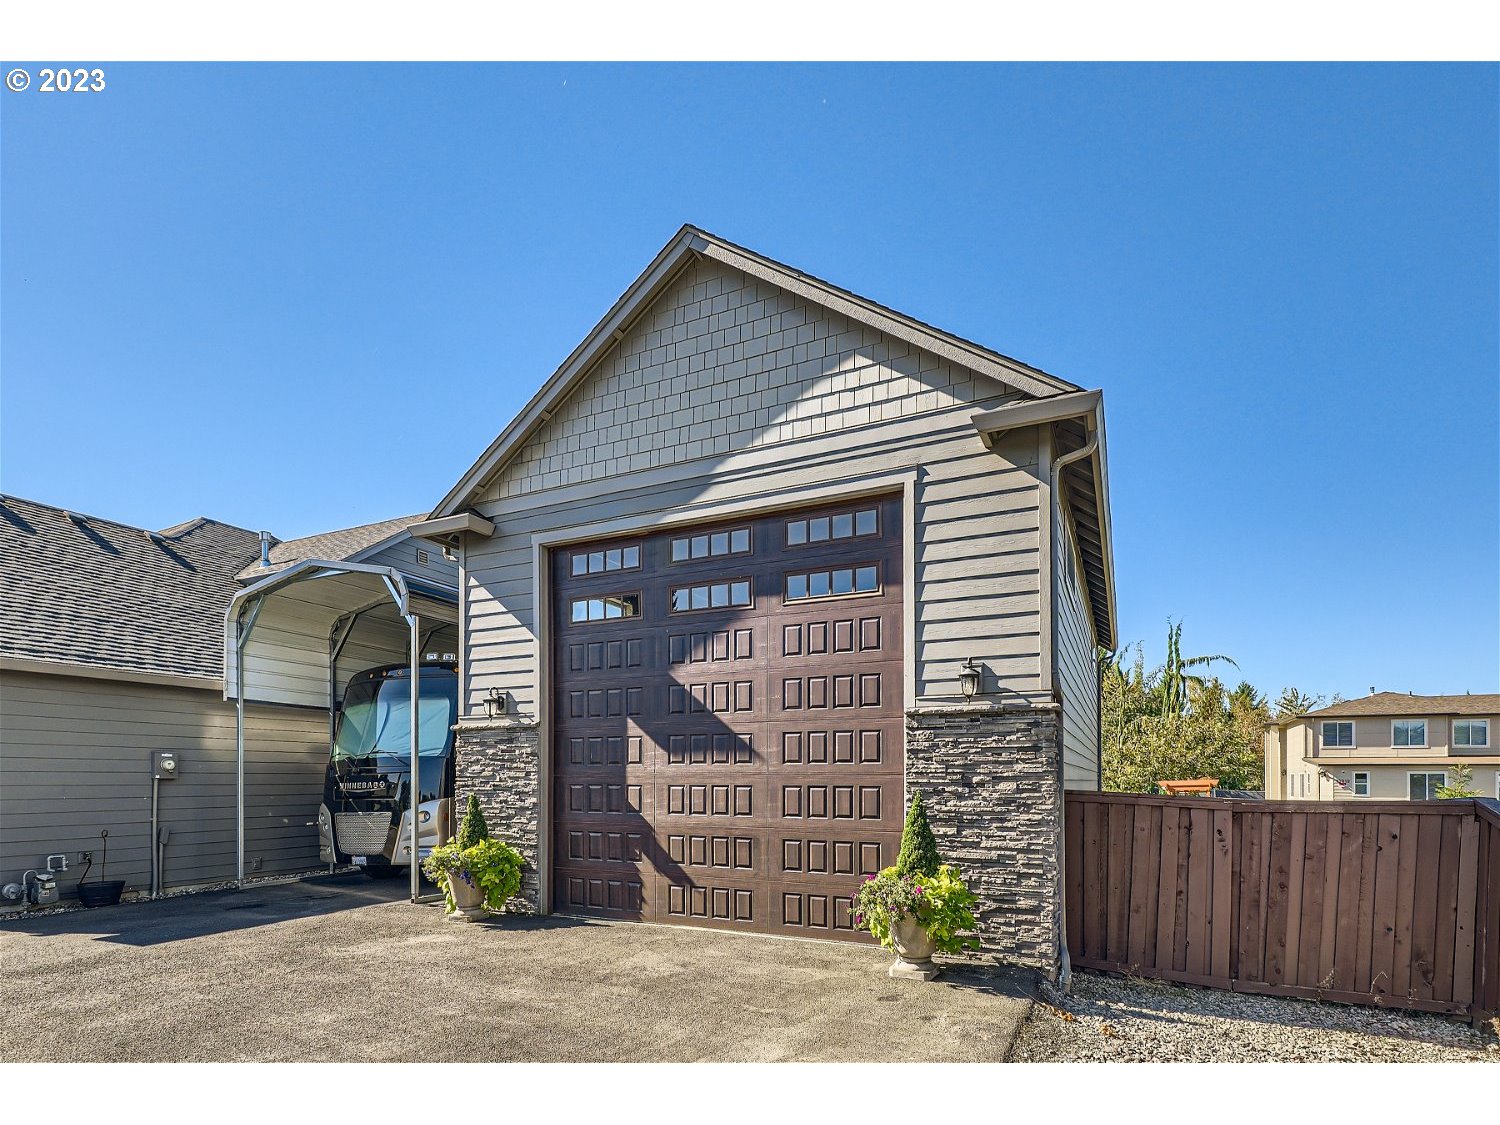 12006 NW 17TH AVE, Vancouver, 5 Bedrooms Bedrooms, ,3.1 BathroomsBathrooms,Residential,For Sale,17TH,23350276